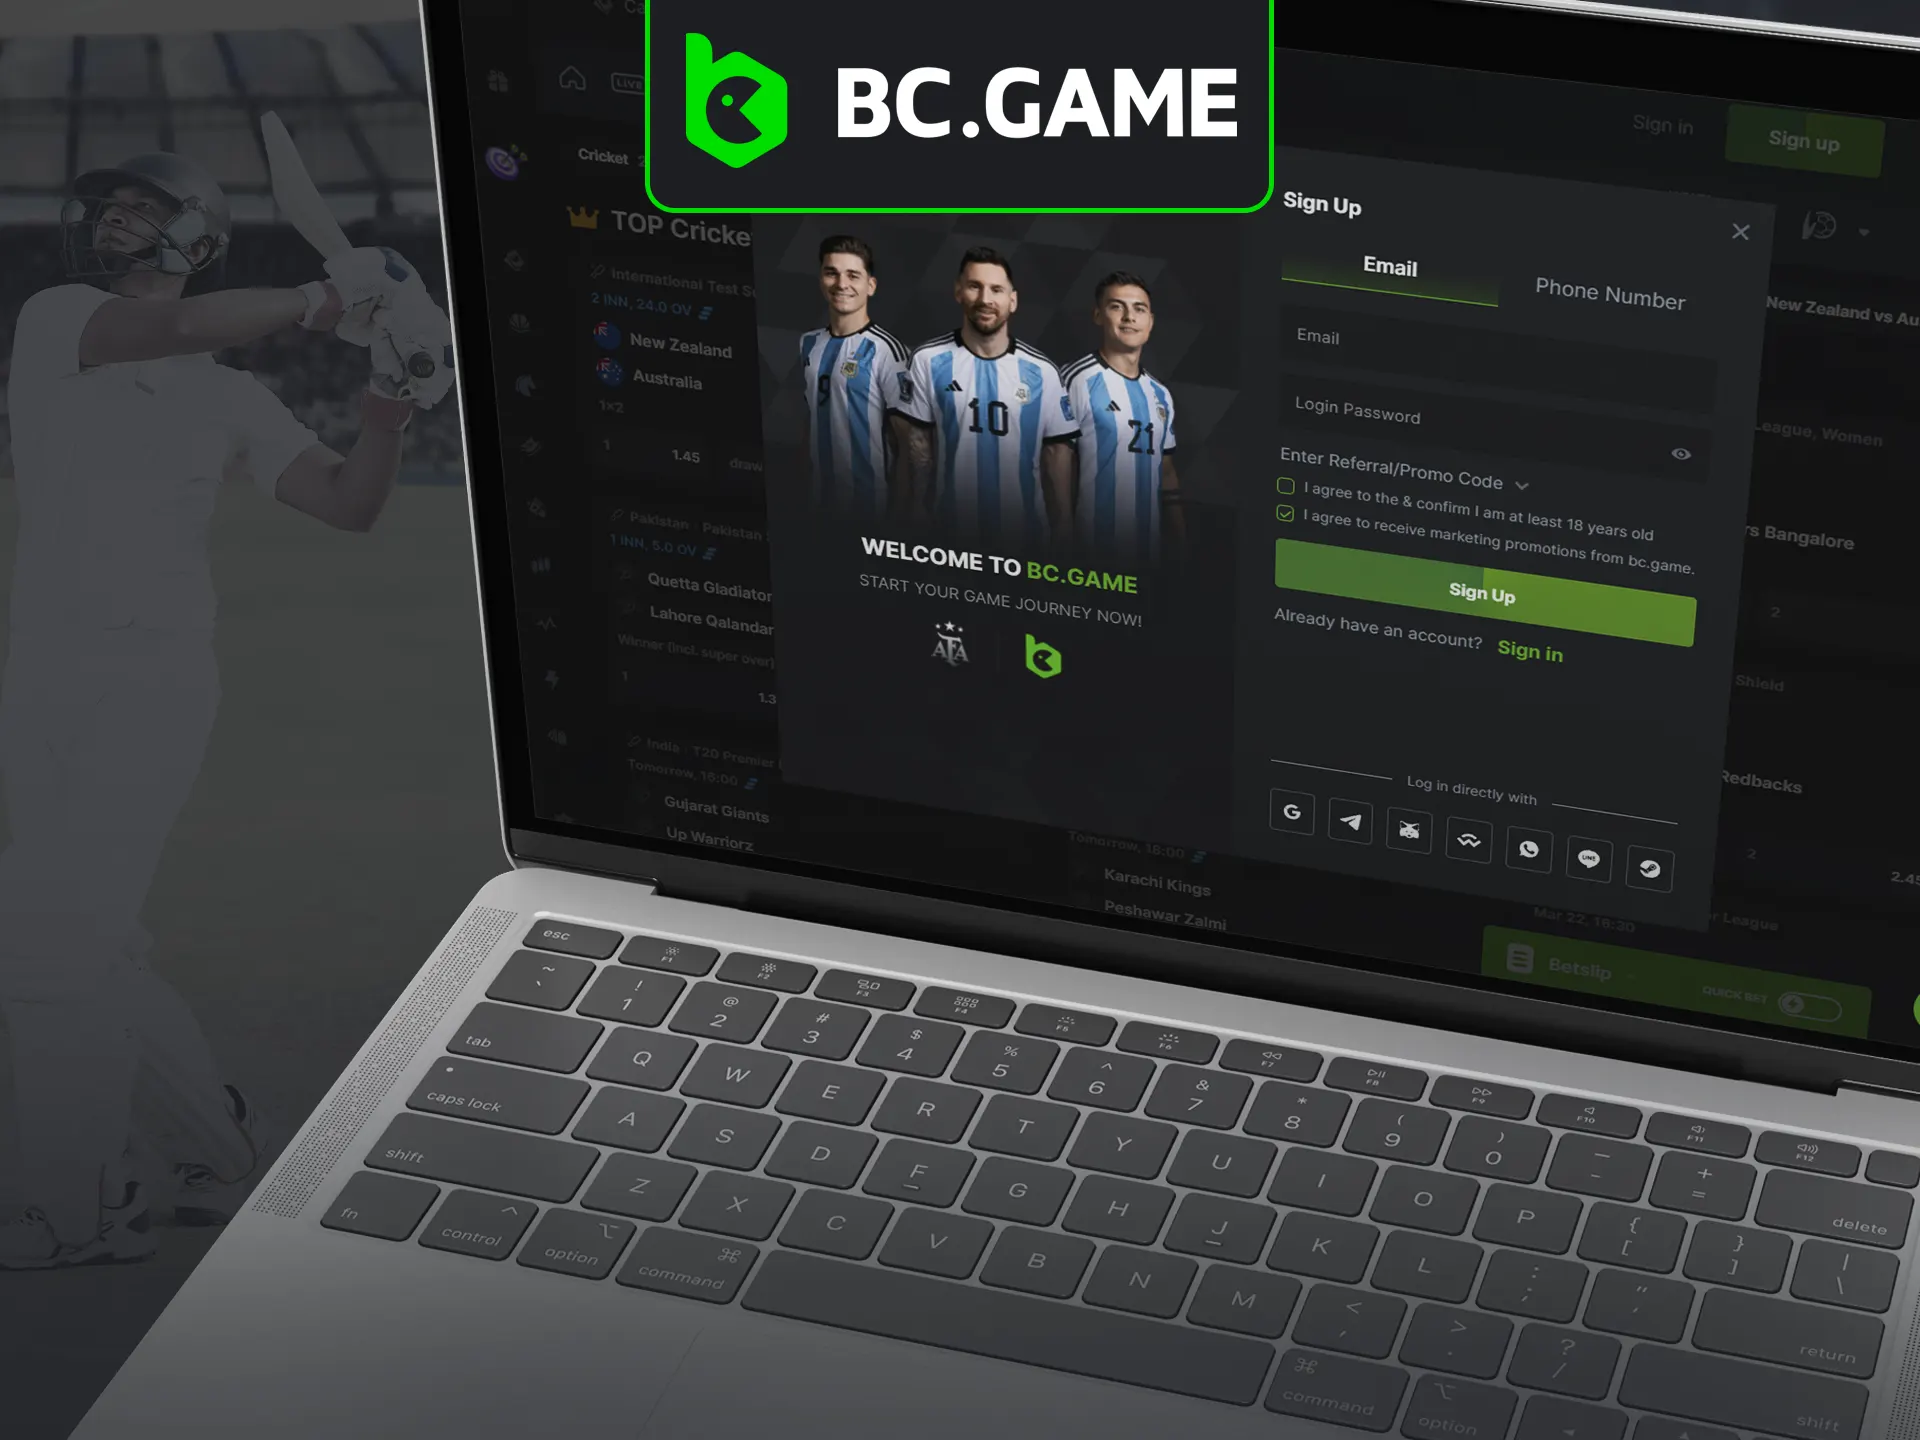 Sign up with BC Game for cricket betting.